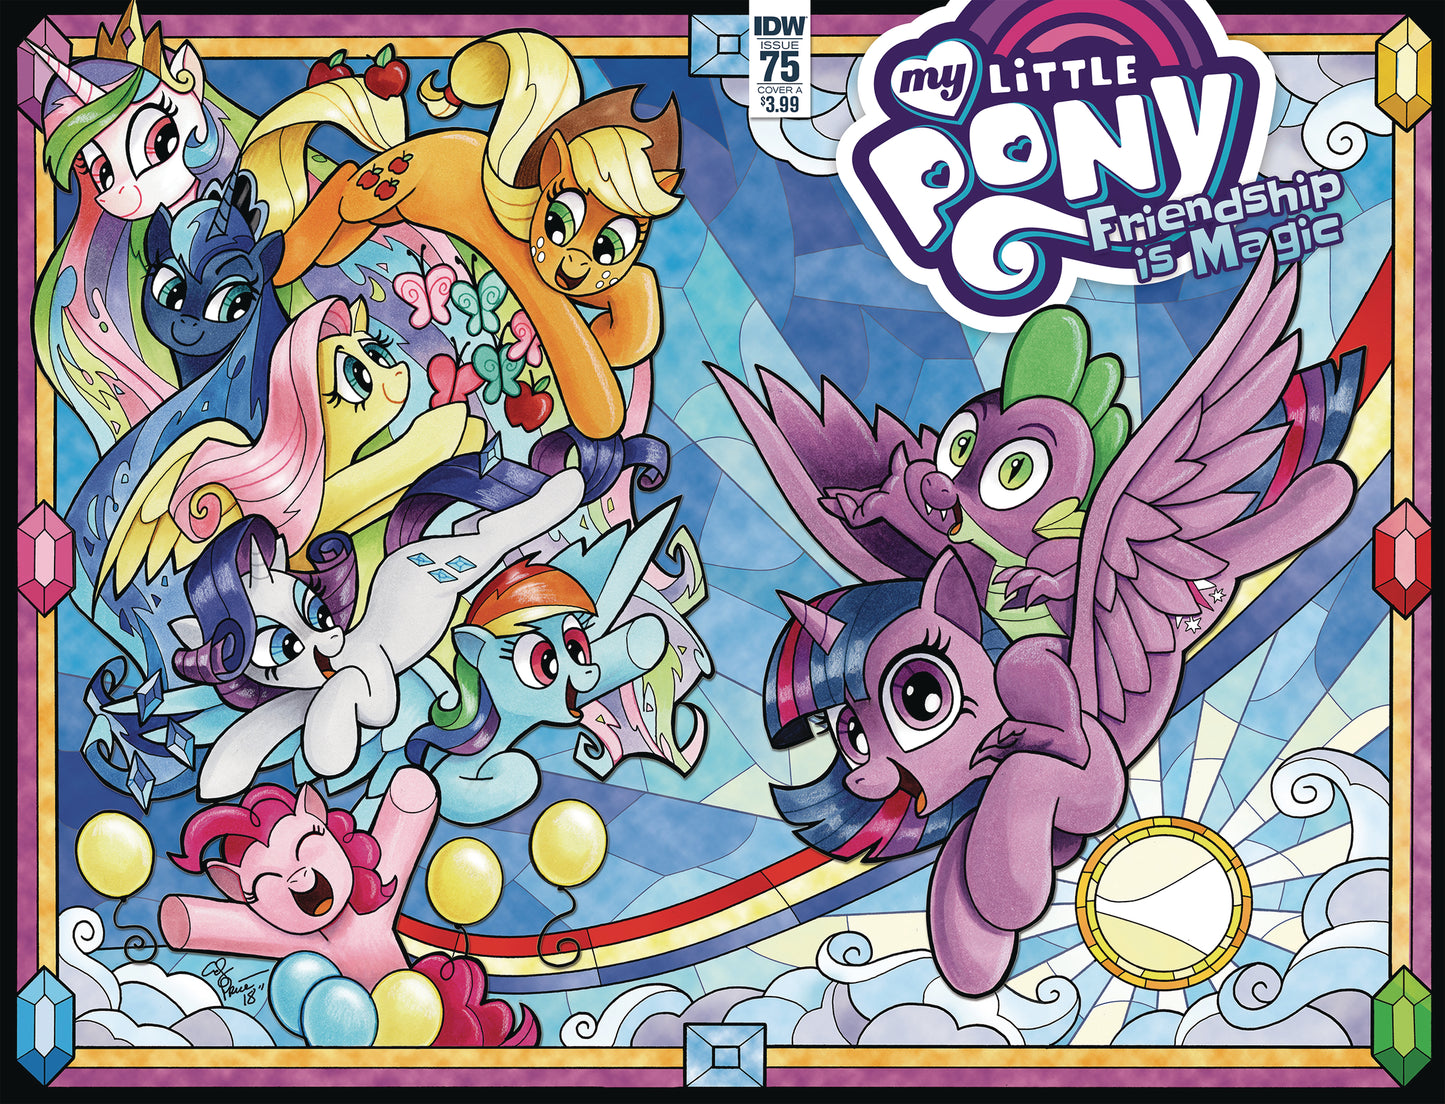 MY LITTLE PONY FRIENDSHIP IS MAGIC #75 CVR A PRICE COVER